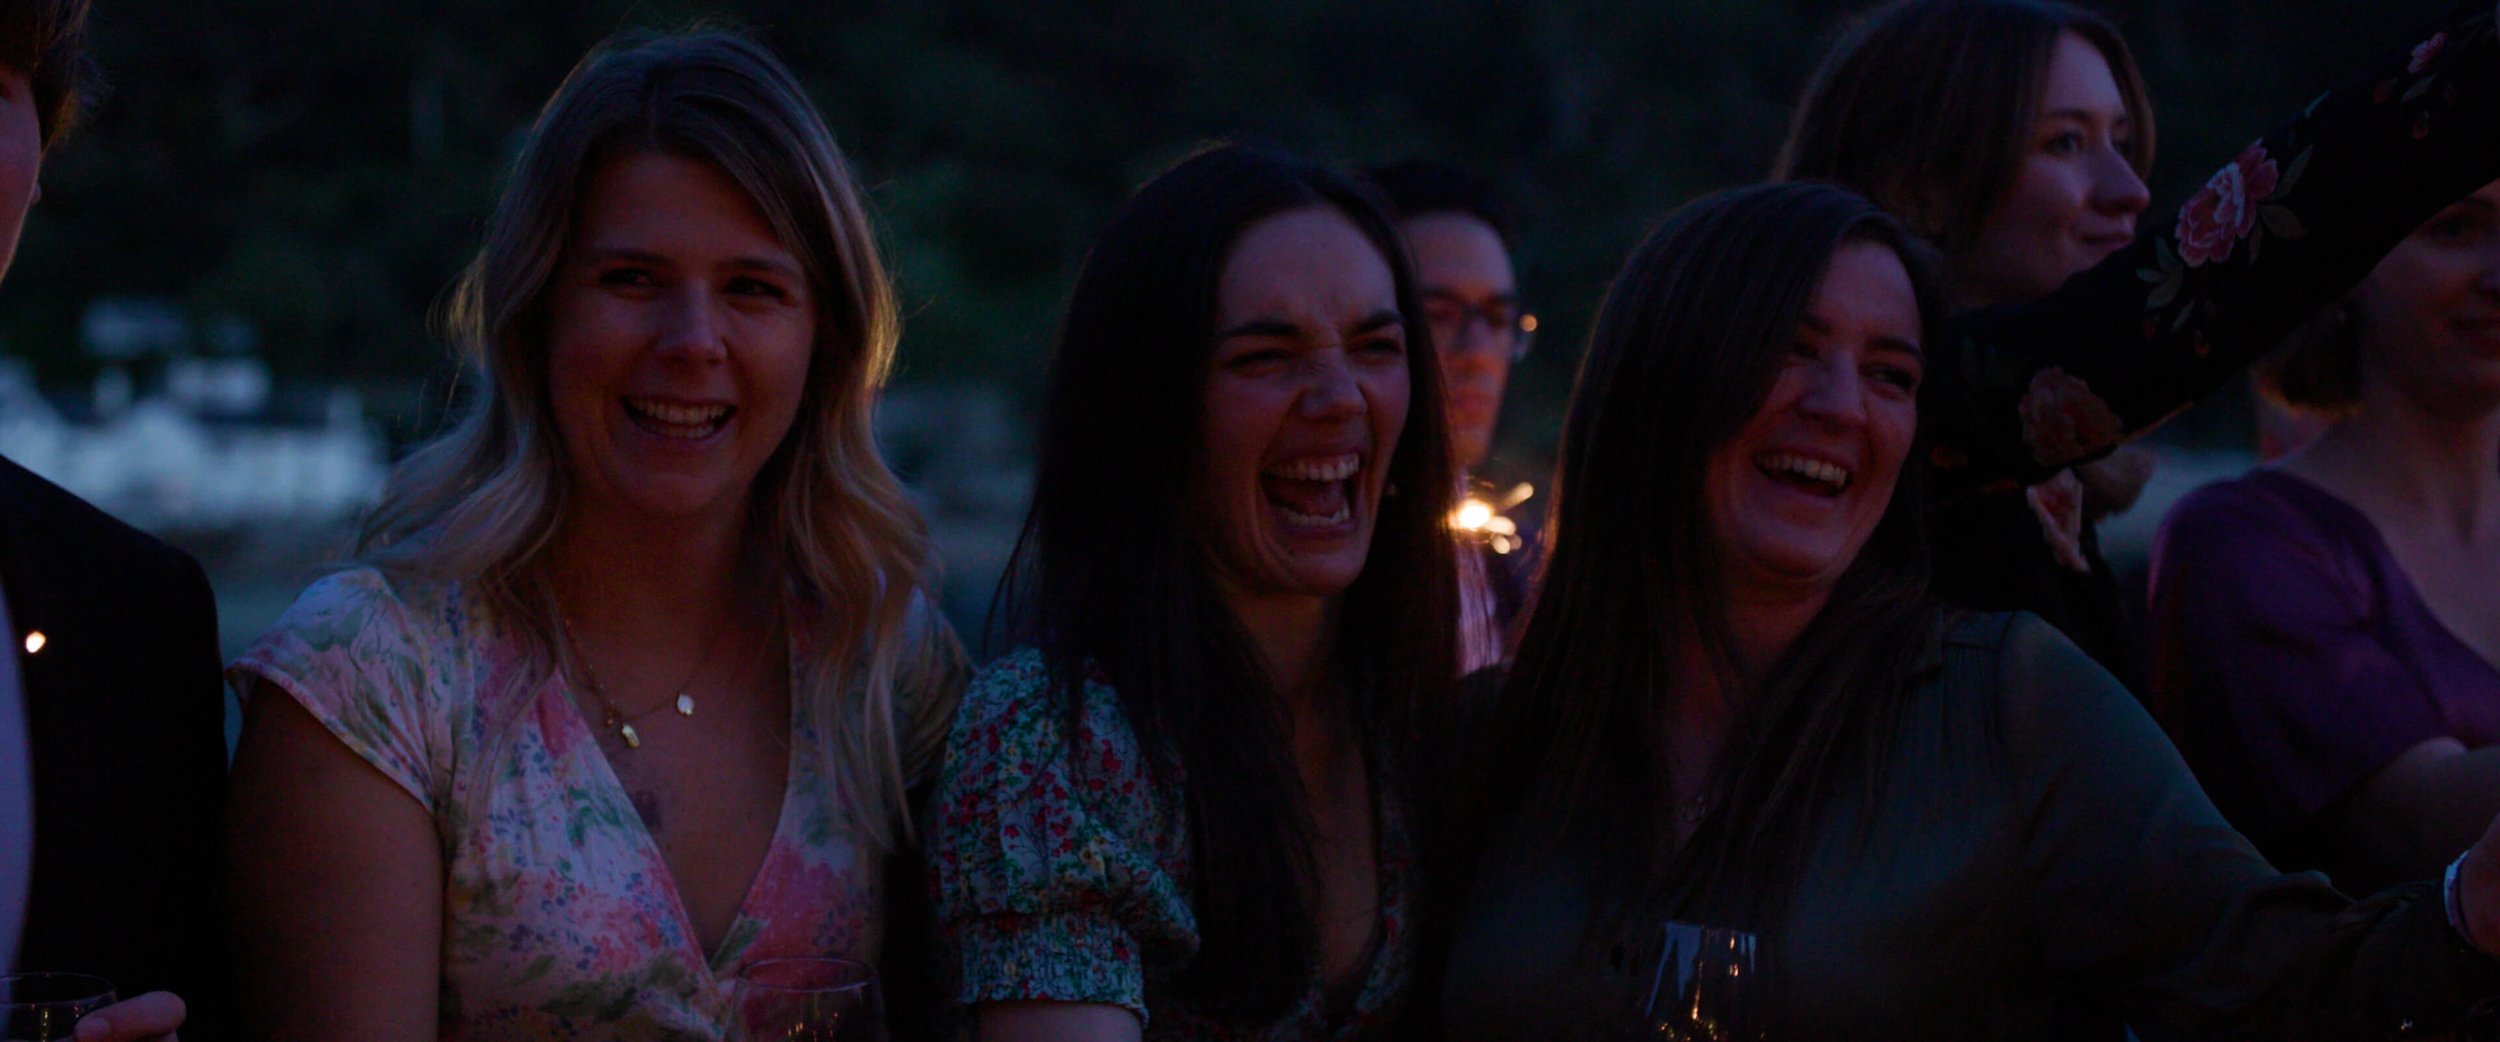 3 female wedding guests laugh hysterically as they enjoy playing with sparklers